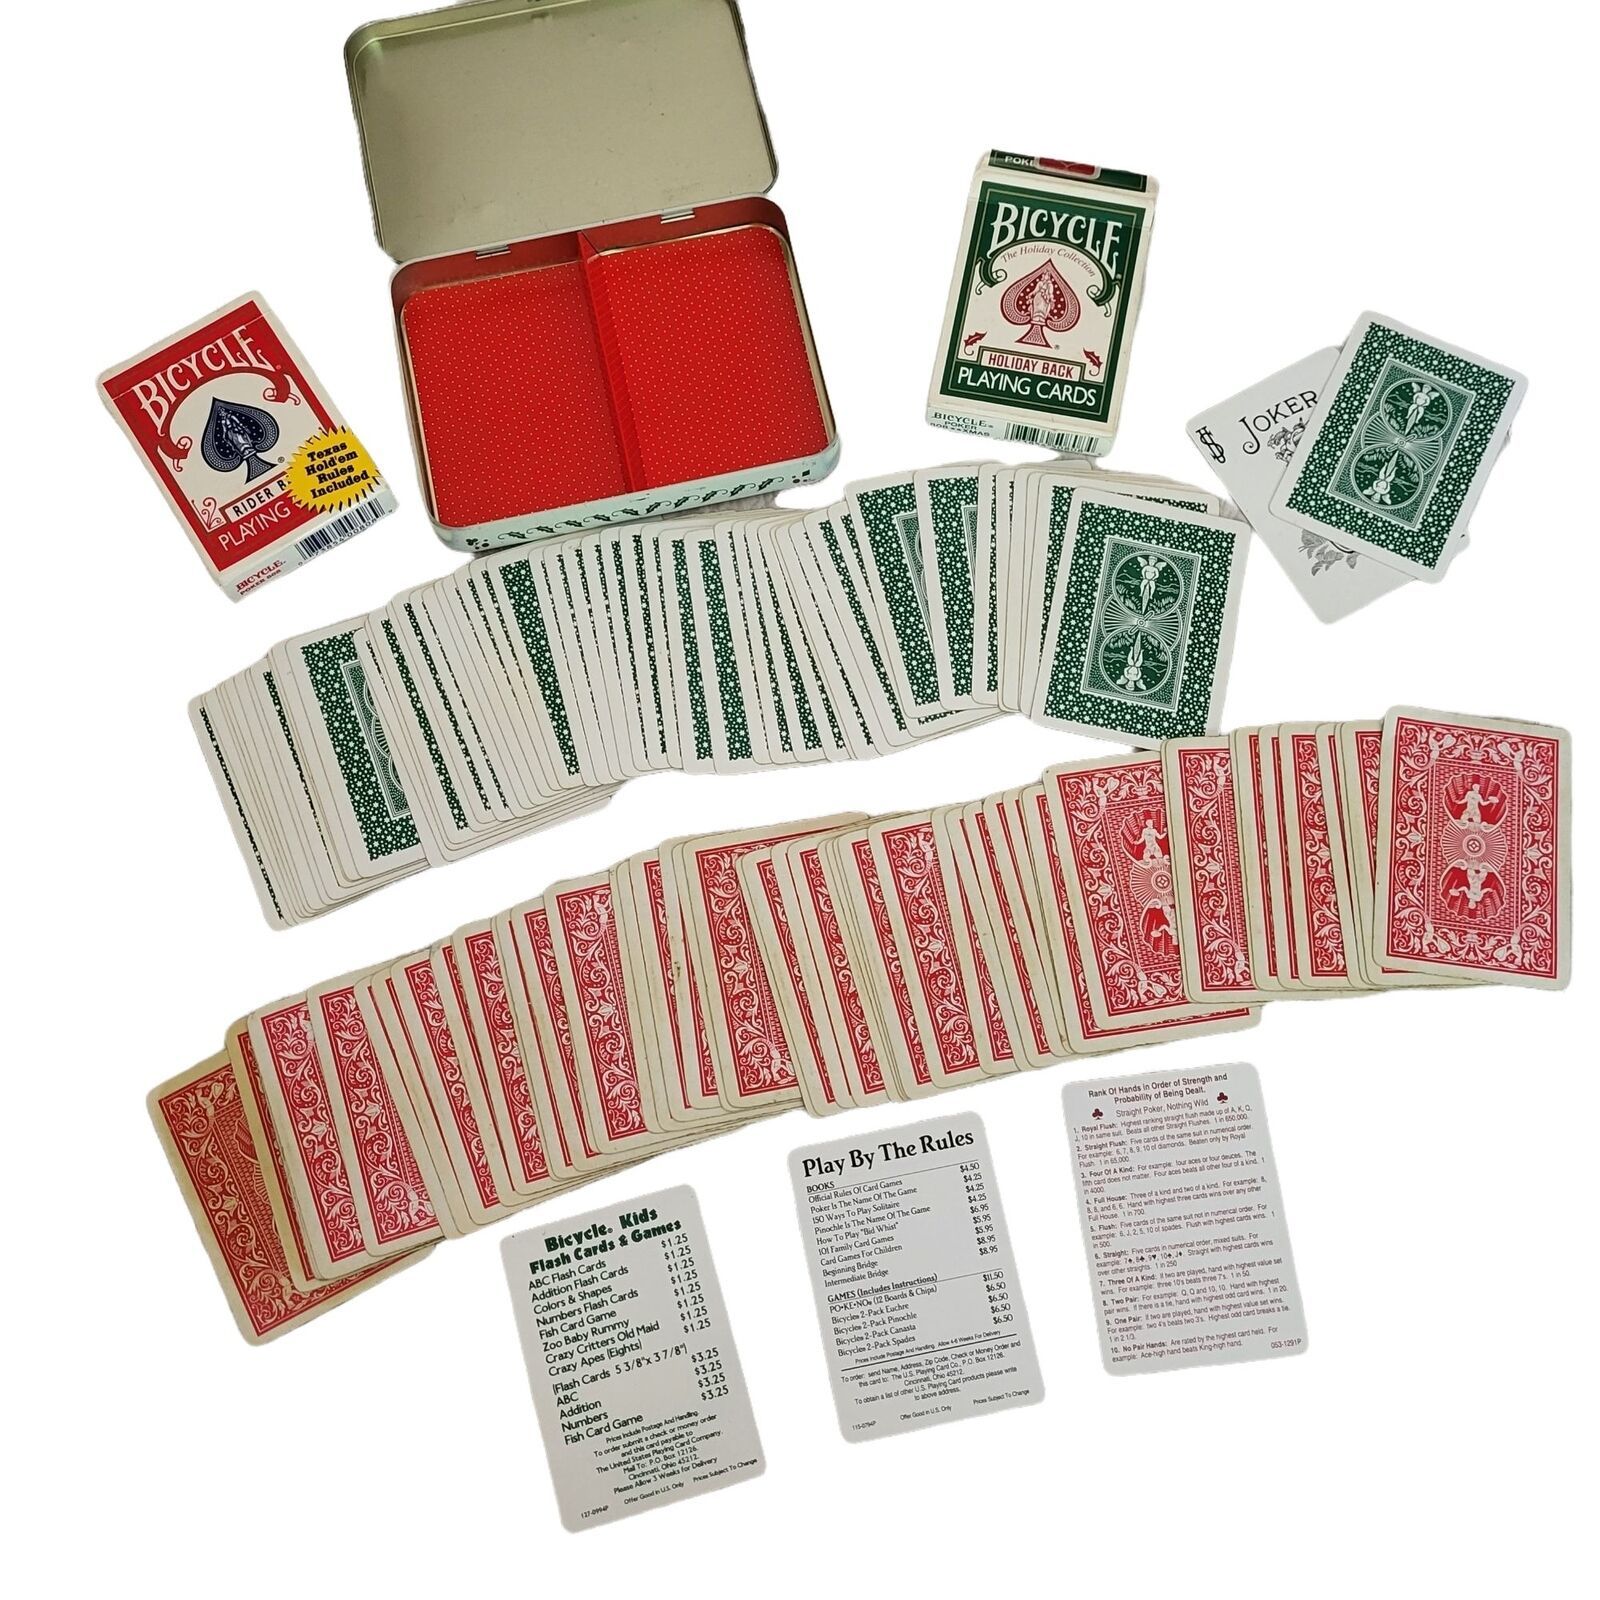 Vintage Bicycle Holiday Playing Cards Set Collector's Tin 2 Poker Decks - $16.65